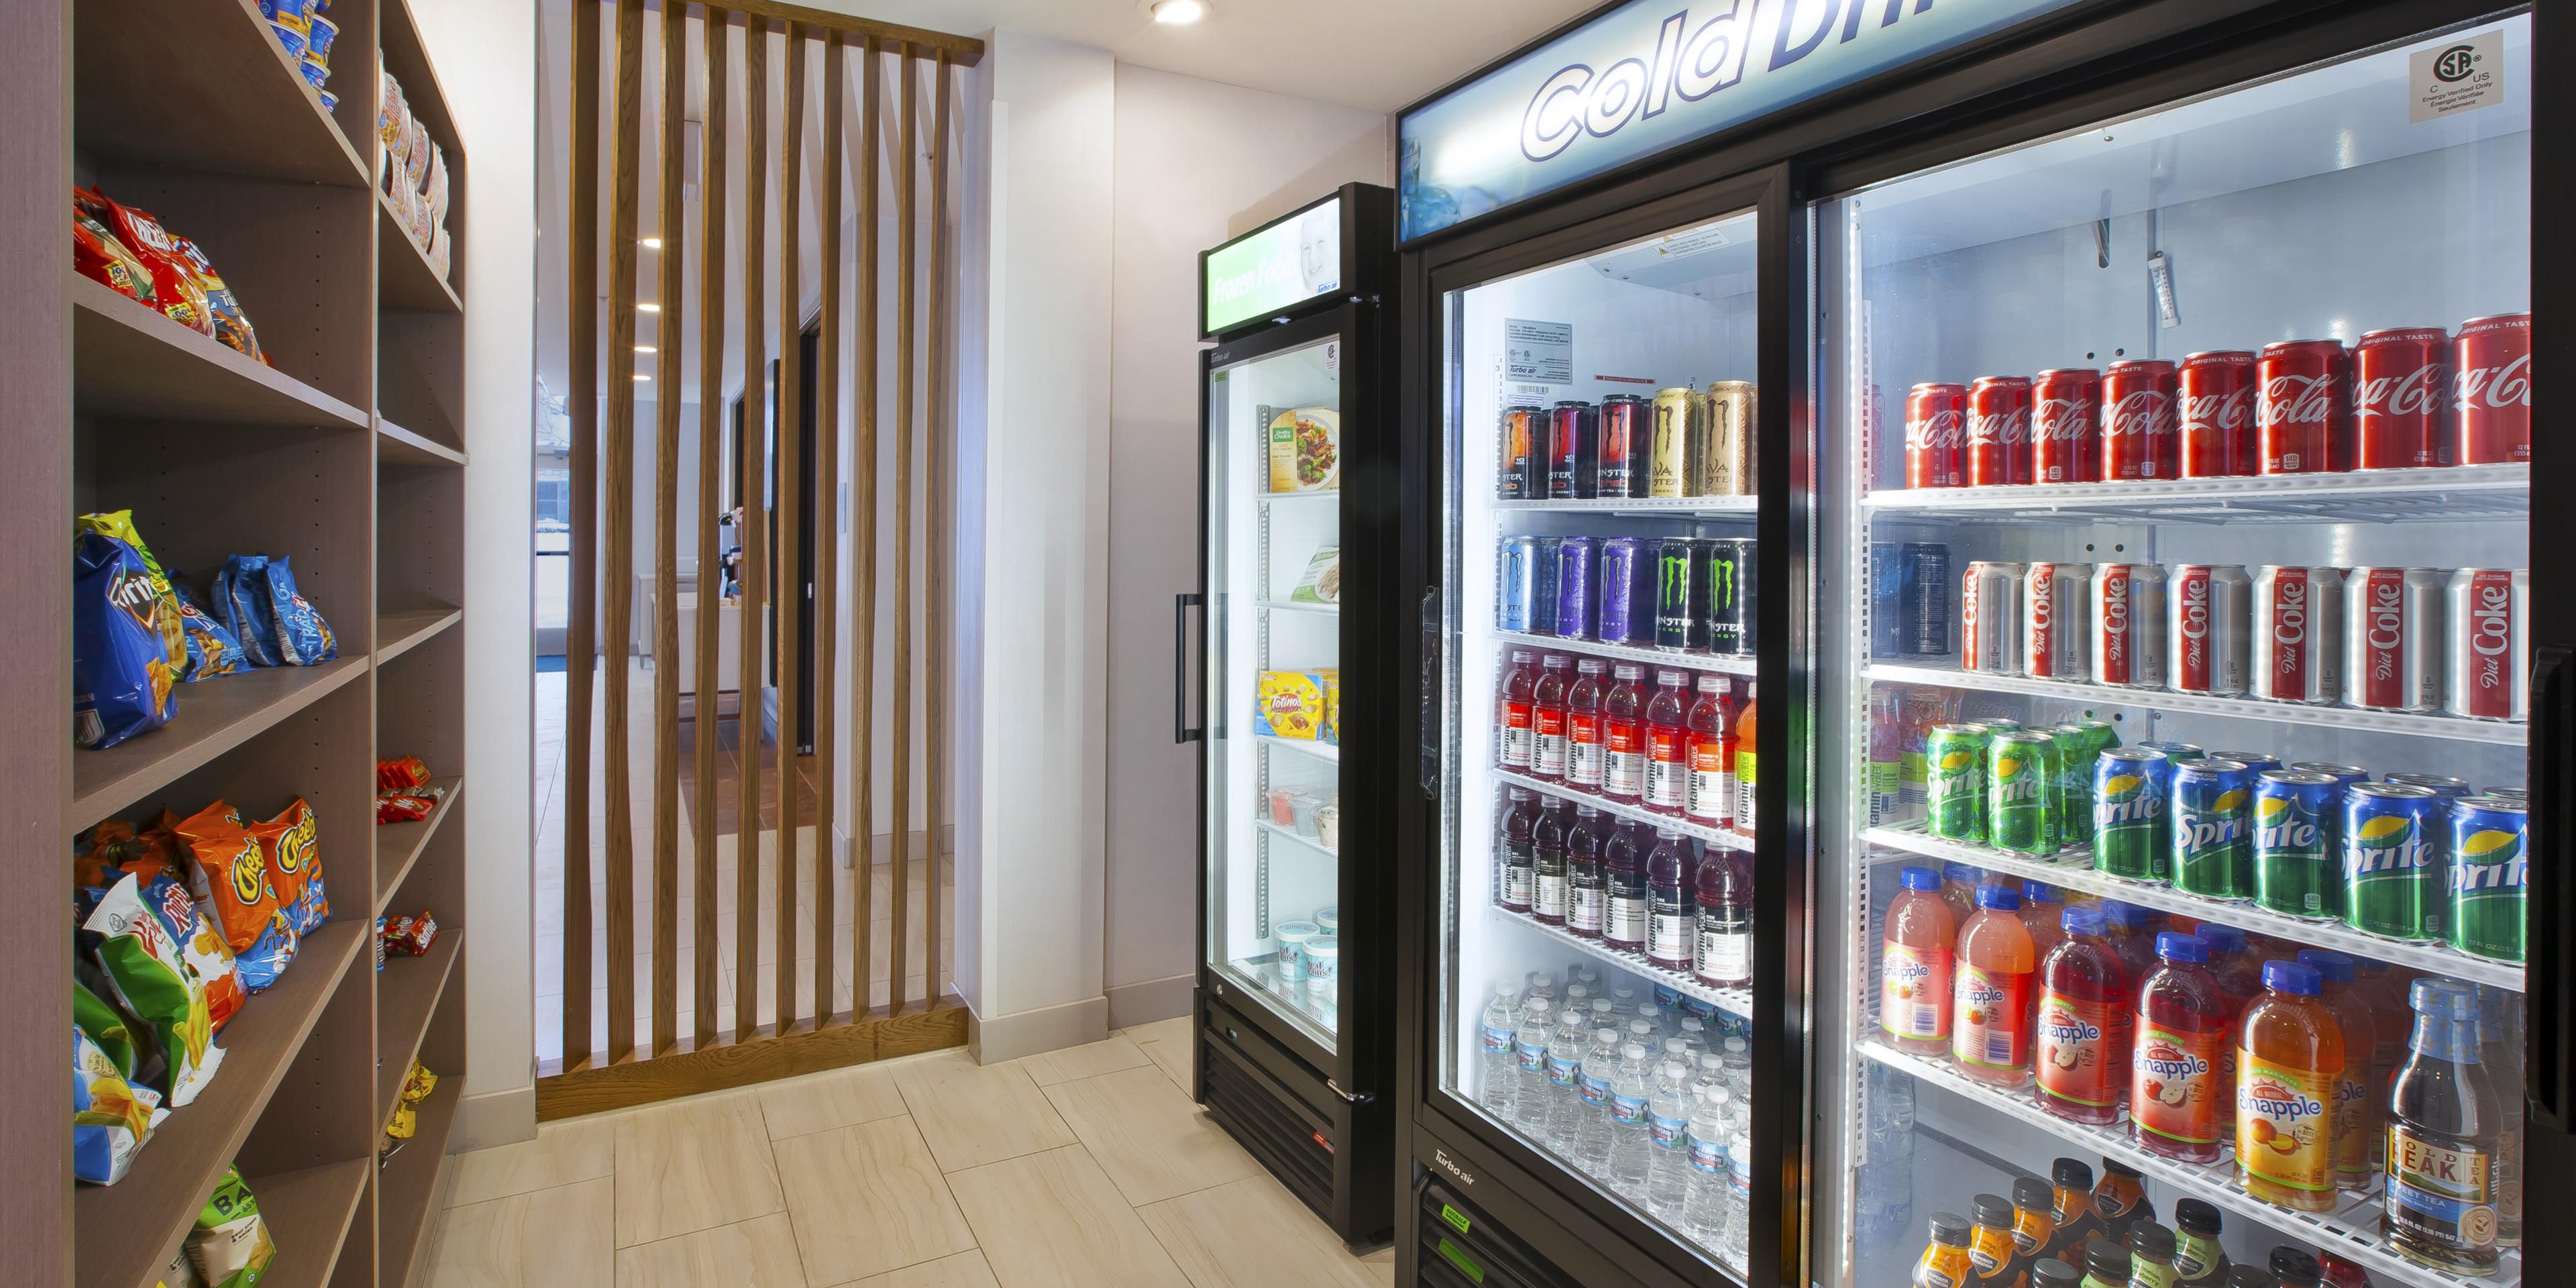 Whether it’s a soft drink and snack during after you call it a day, or perhaps some needed sundries our Pantry is open to satisfy your immediate needs. Located on lobby level.